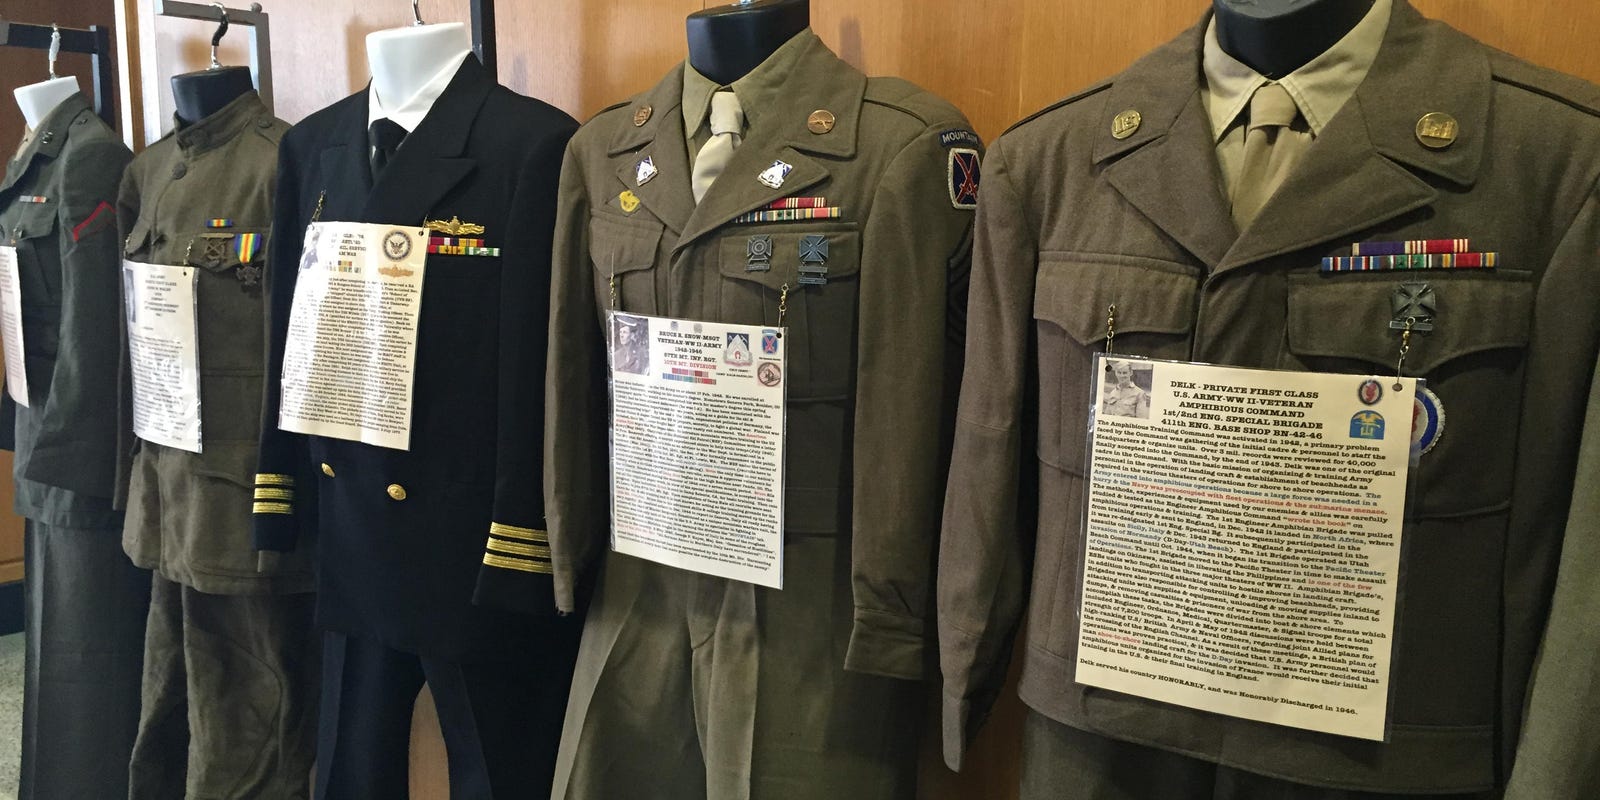 Exhibit Of Military Uniforms Brings Stories To Life